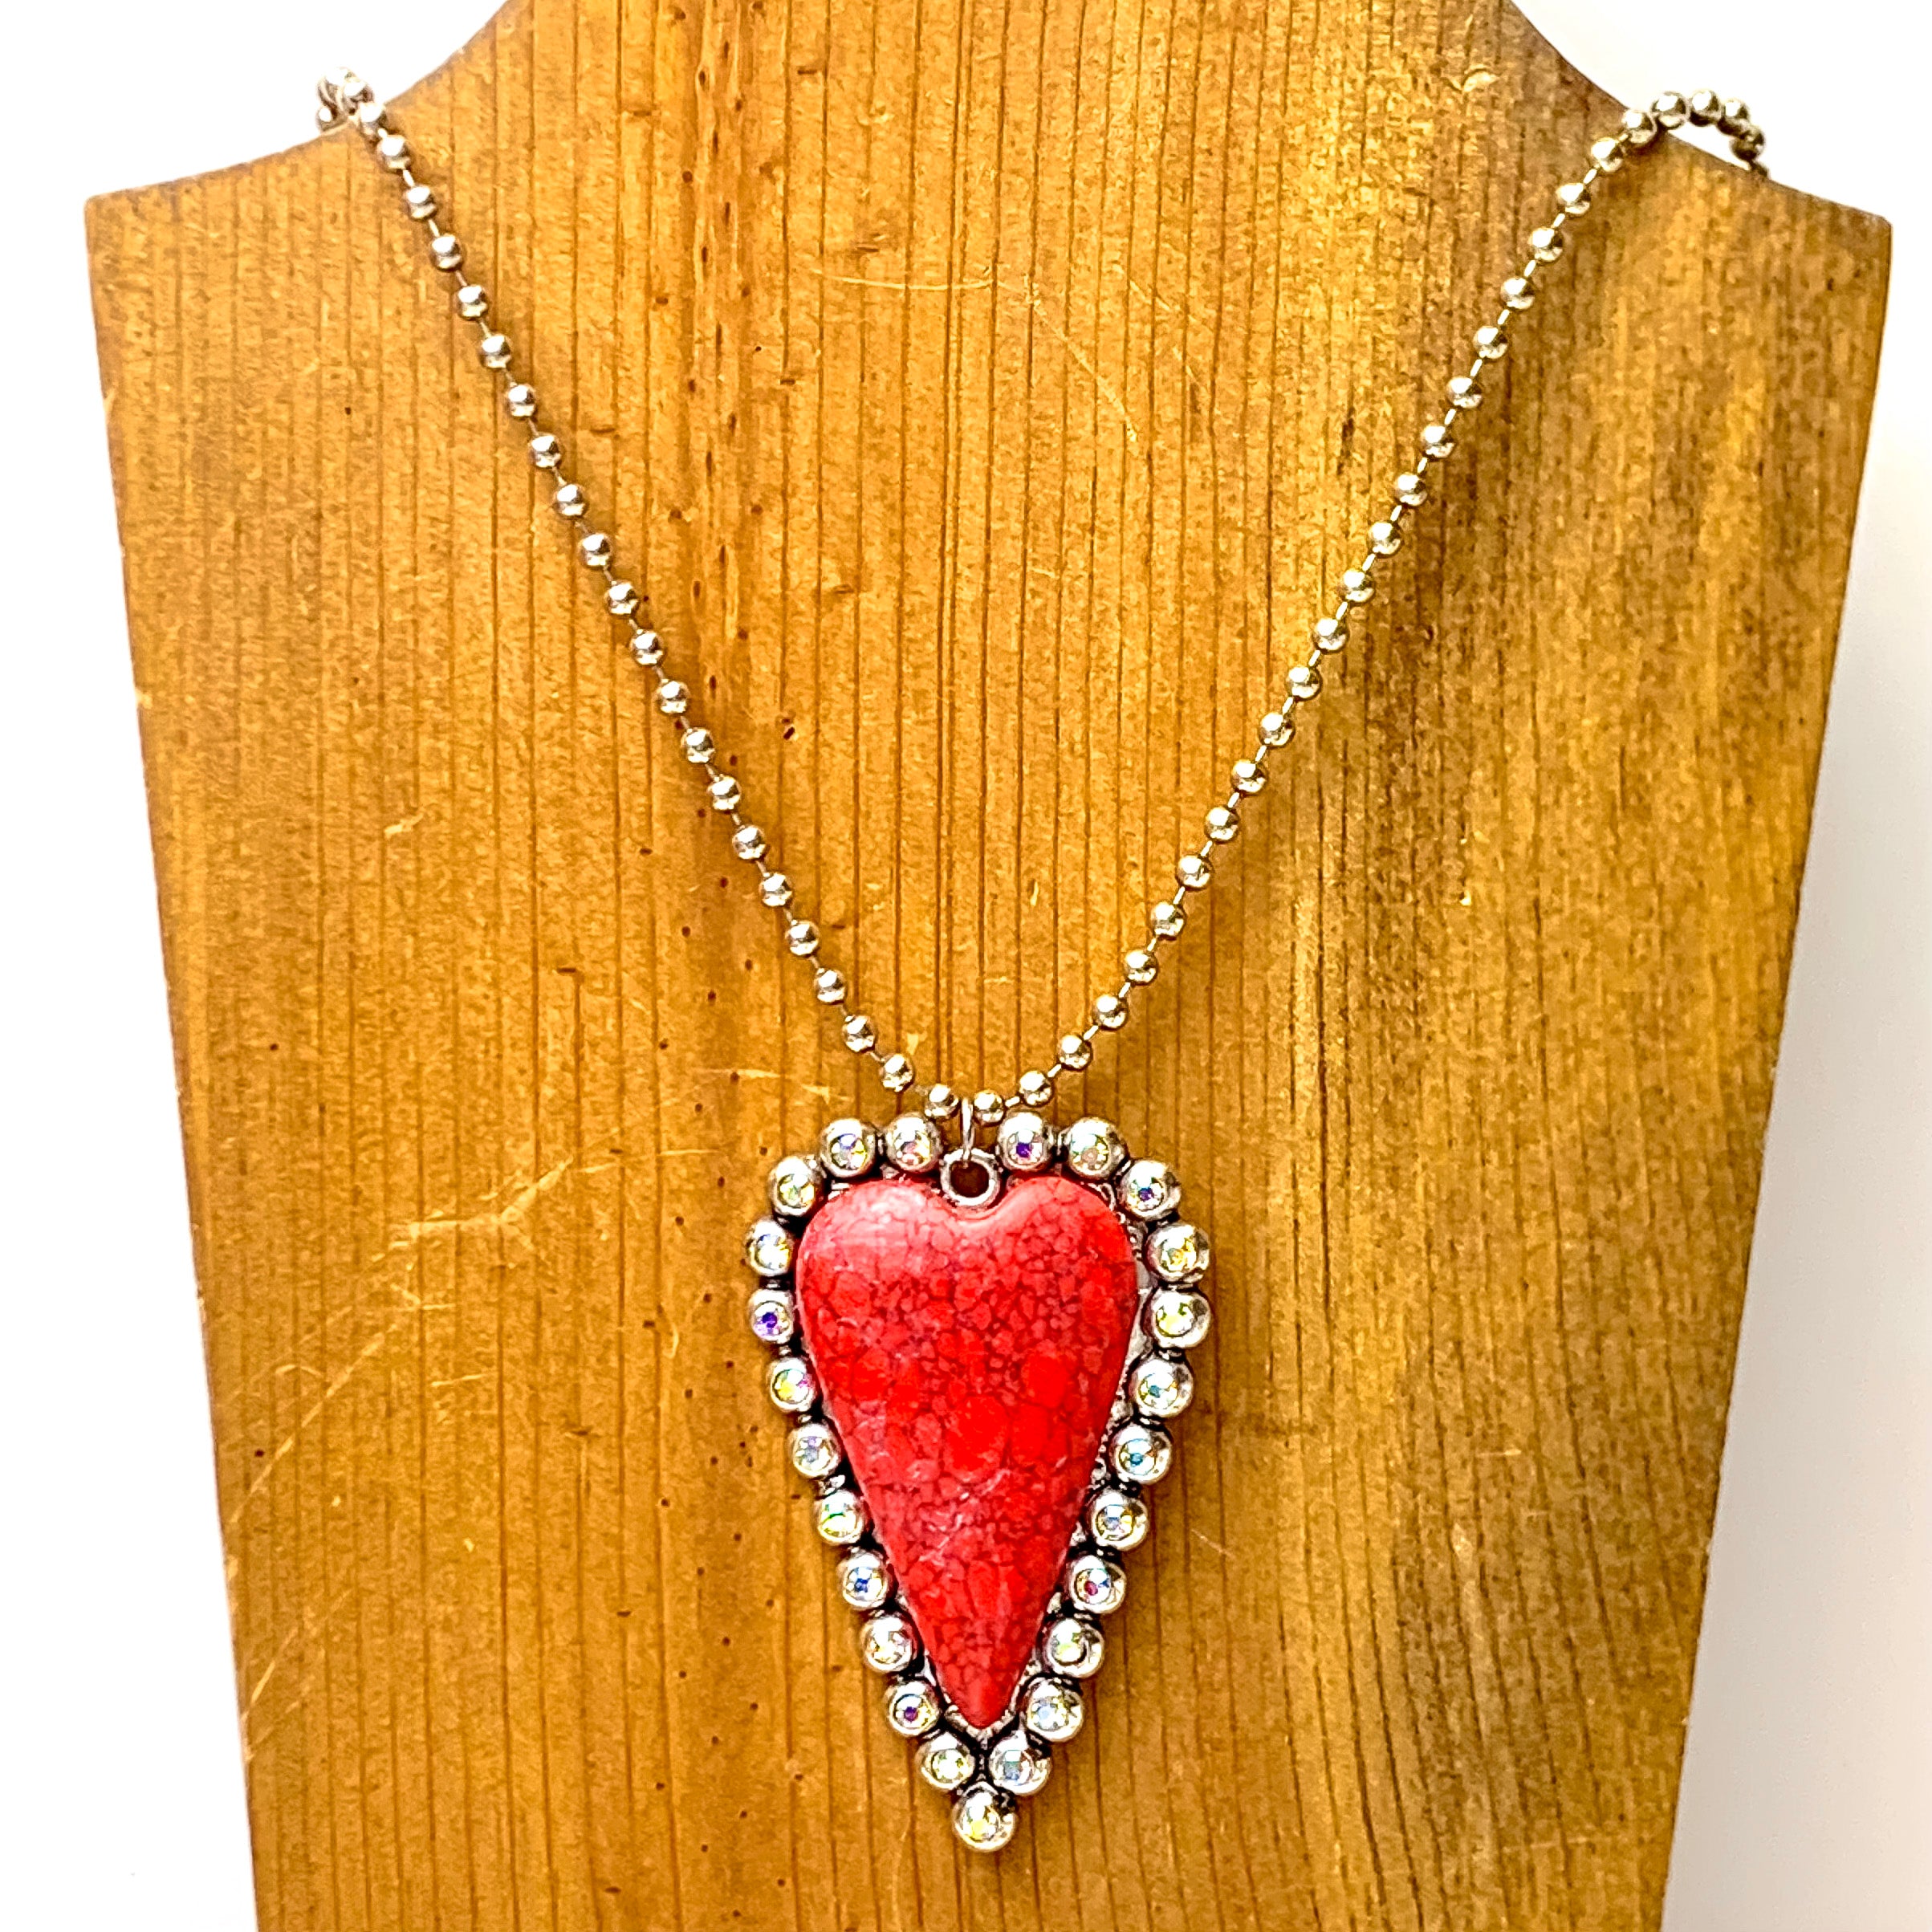 Silver Beaded Necklace With Faux Stone Heart Pendant and AB Crystal Border Accents in Red - Giddy Up Glamour Boutique